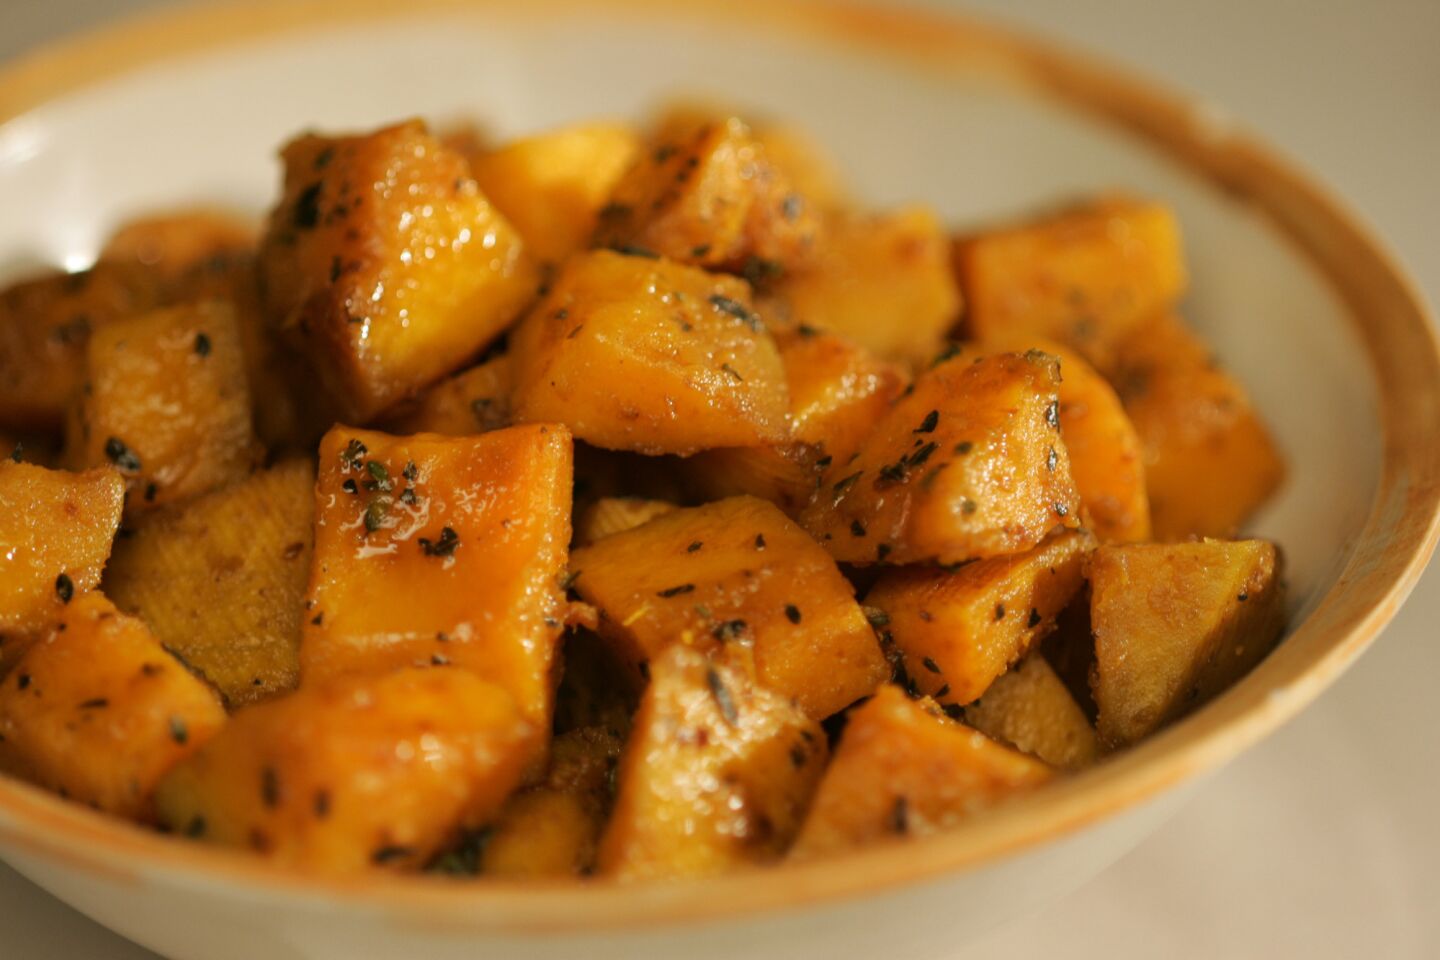 Of winter squash and sweet potatoes